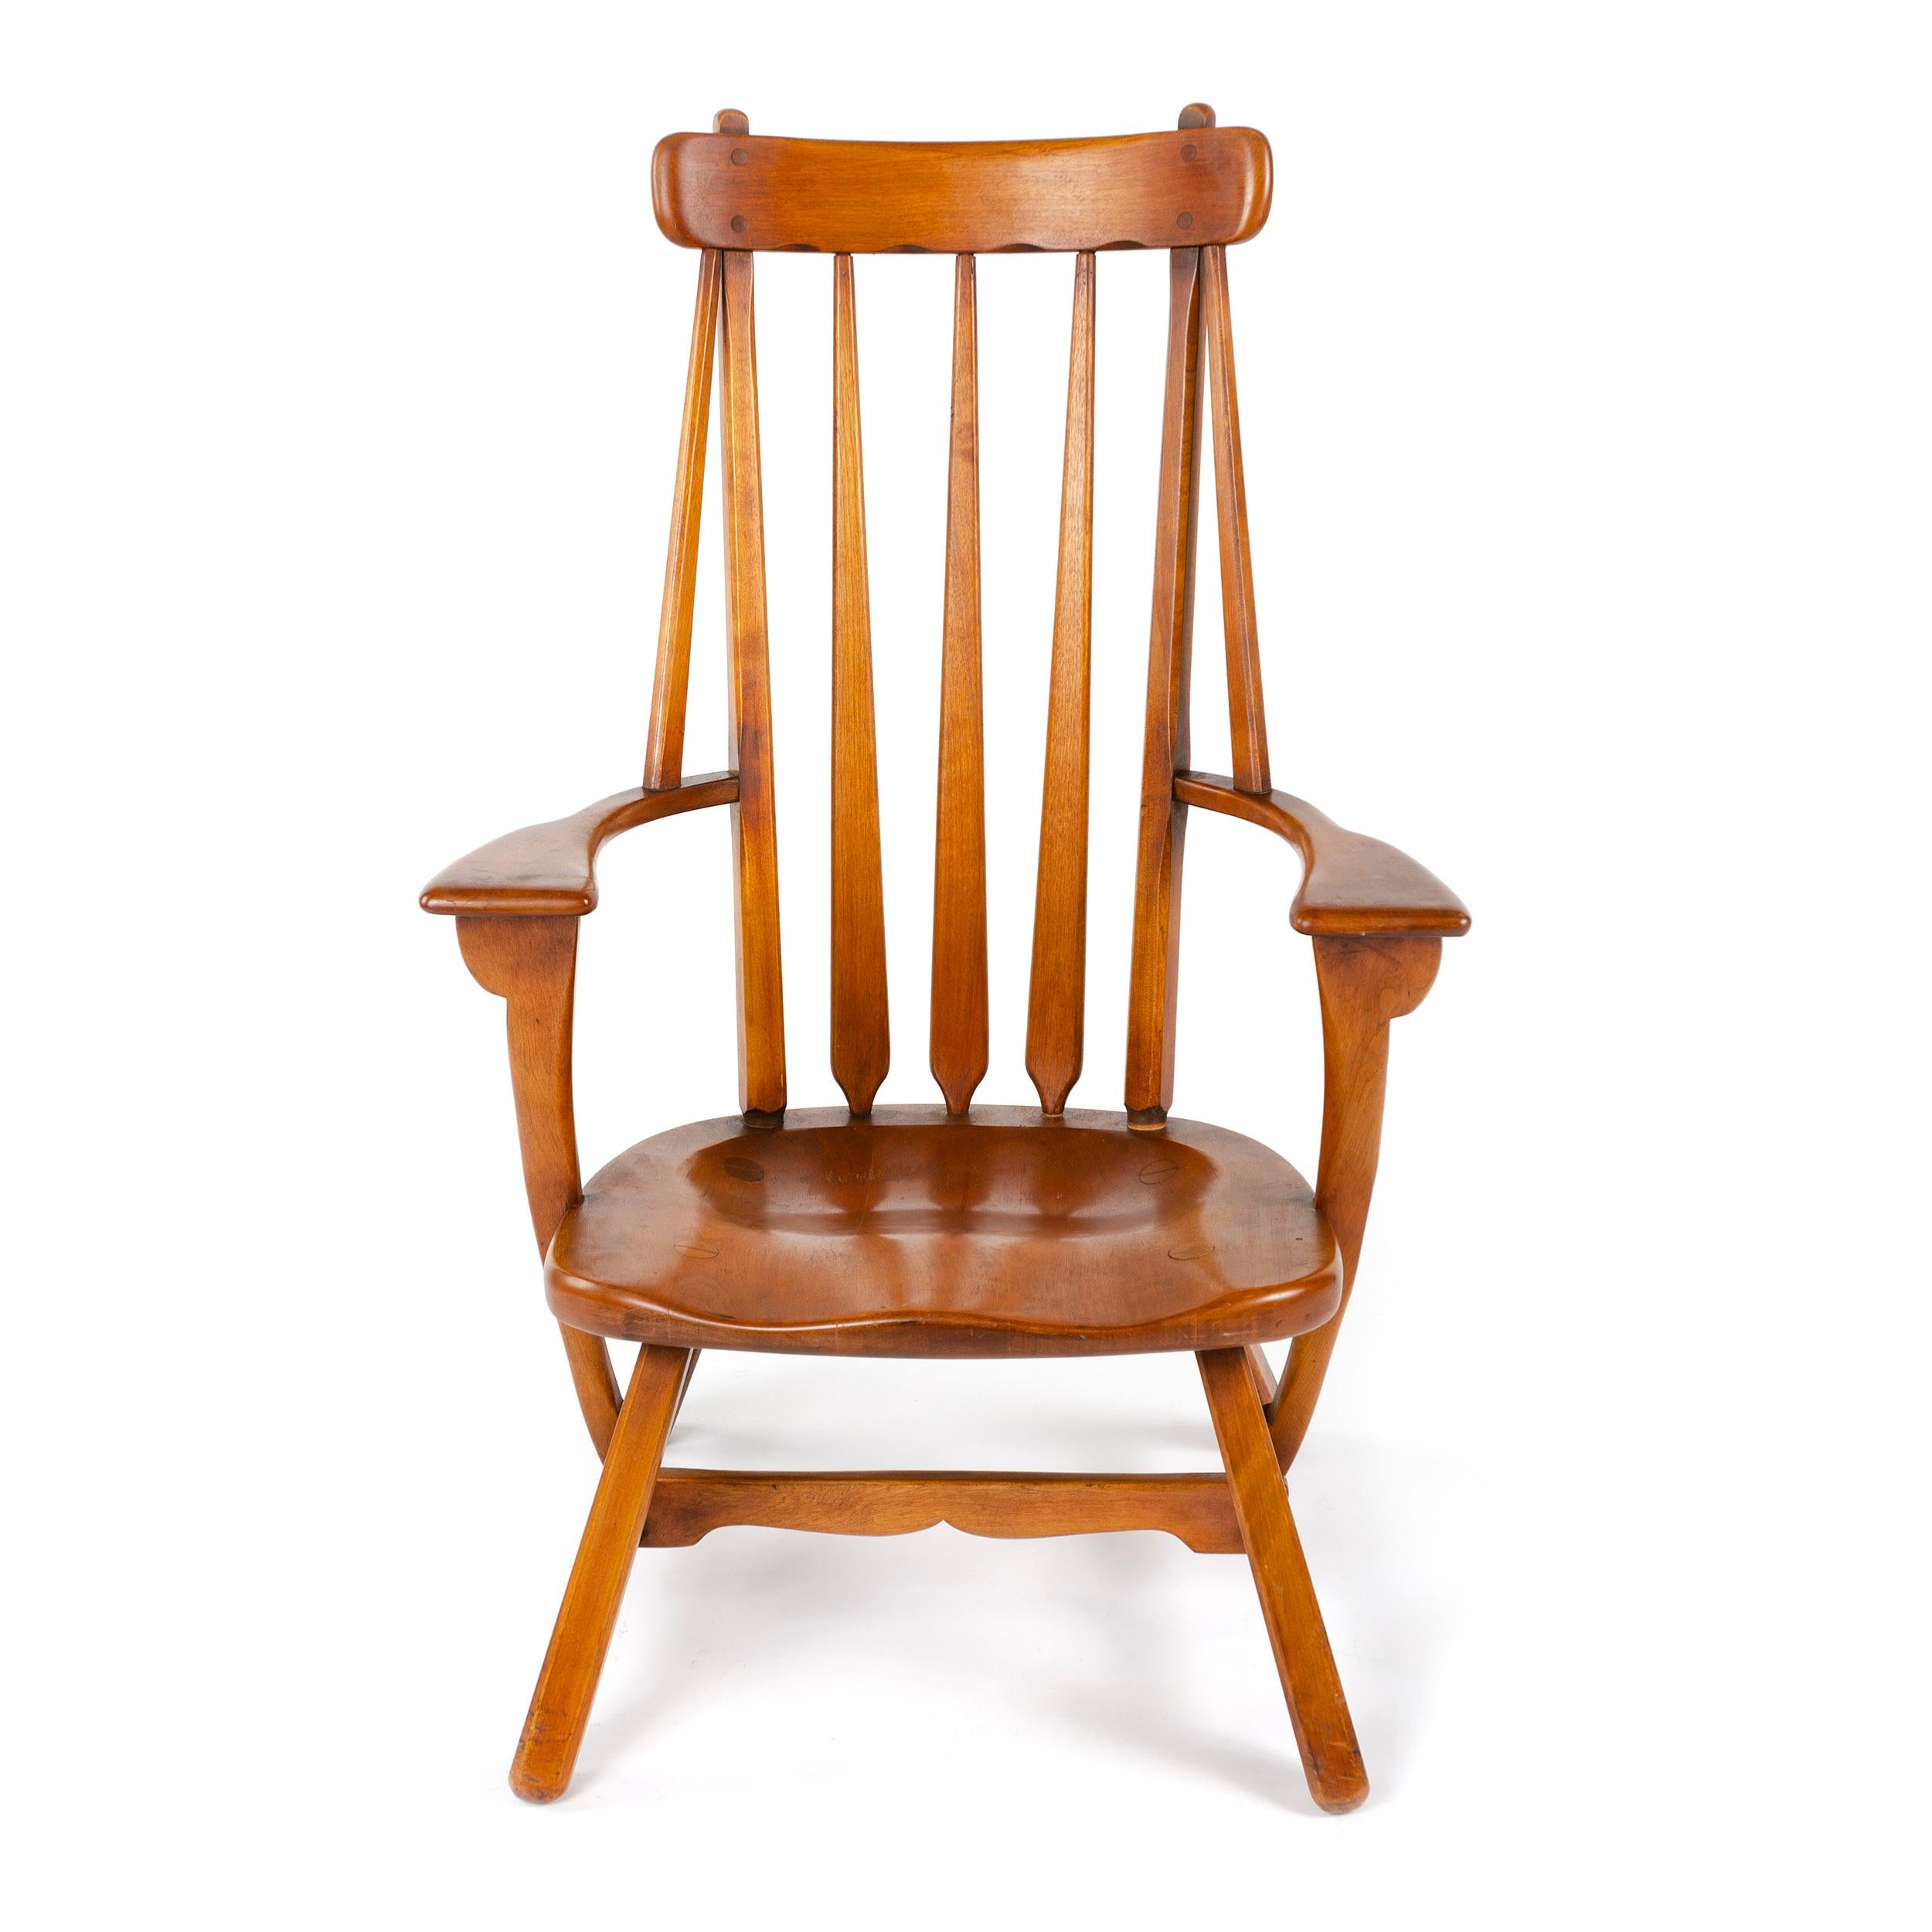 A masterful armchair in solid birch with hand hewn spindles and a curved lower cross arm.